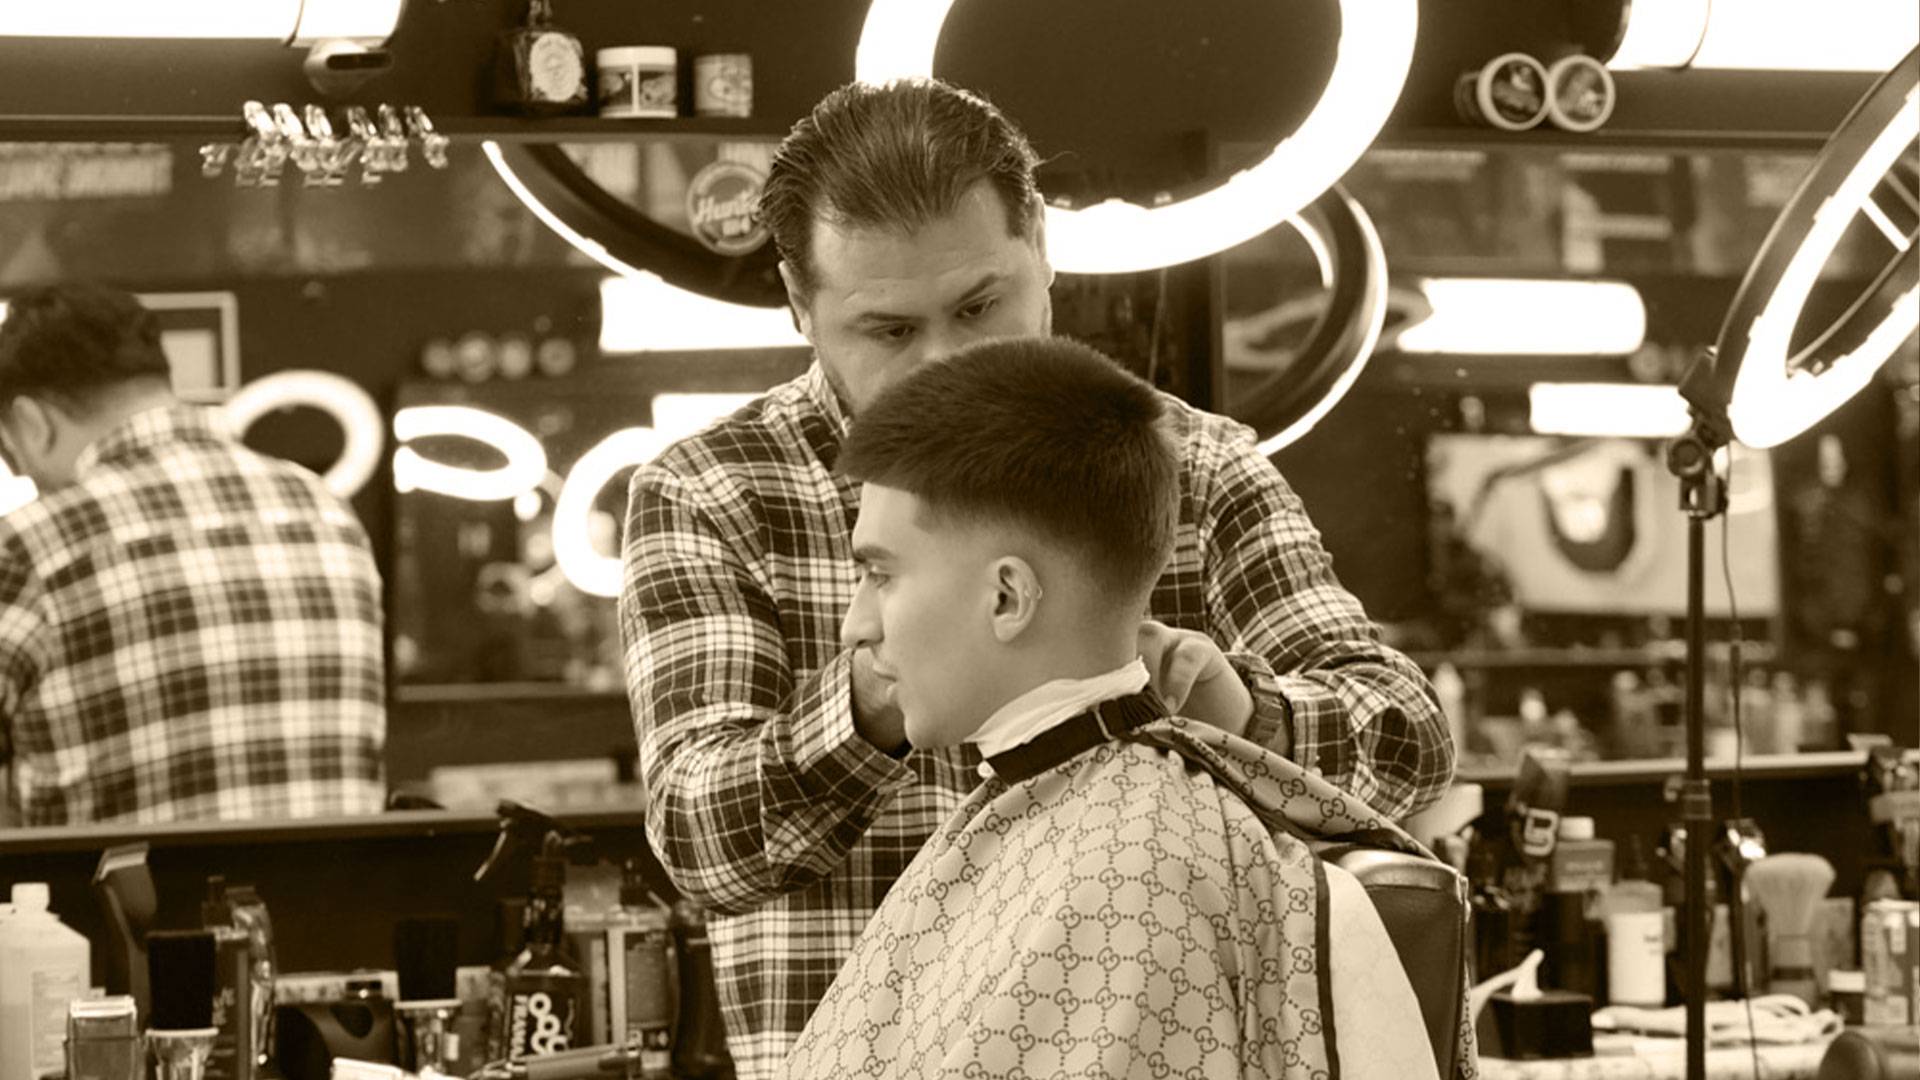 Barber working on a fade haircut - Made Men Studios